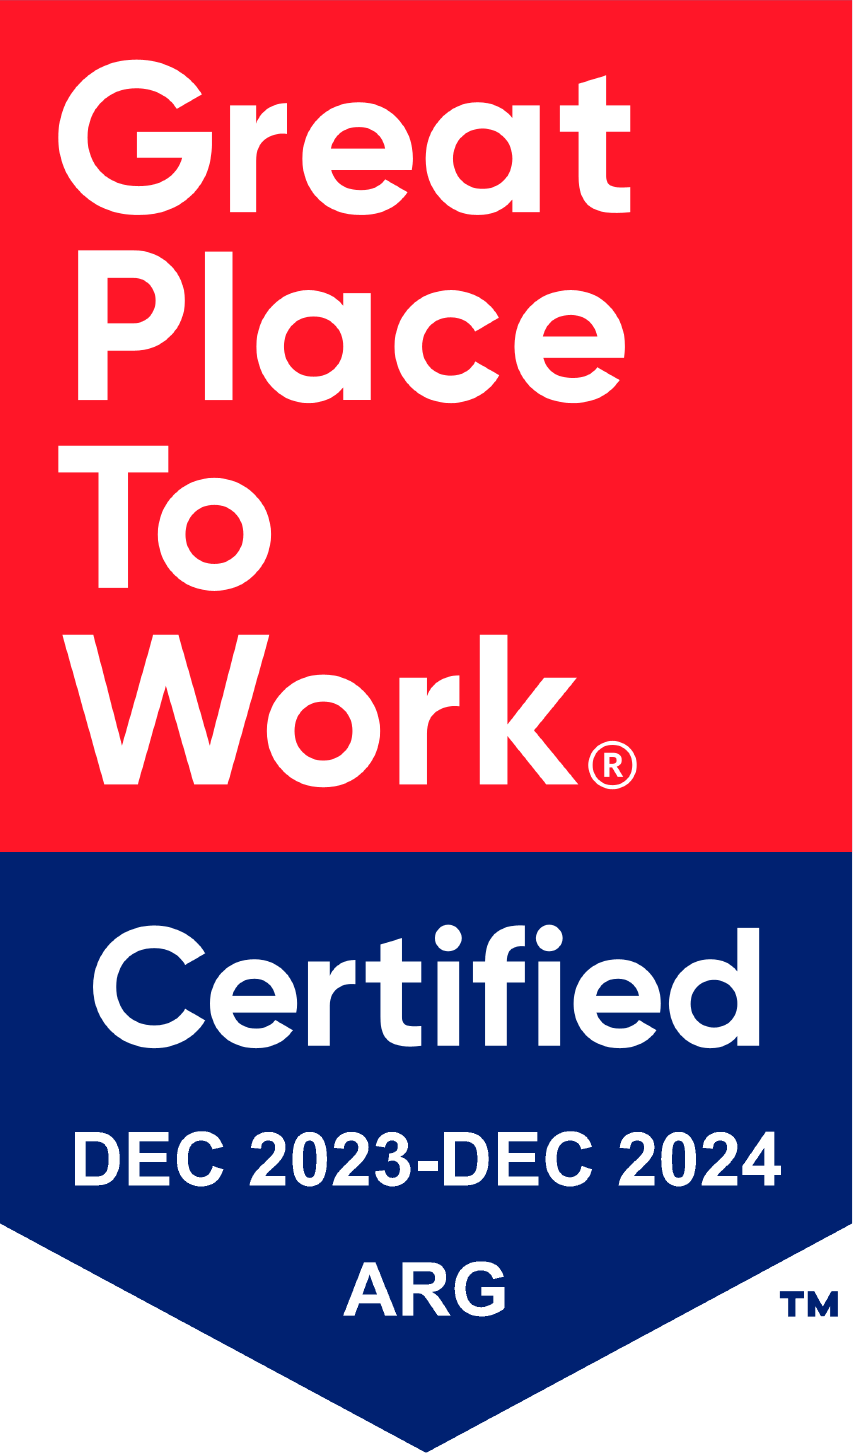 Great Place To Work 2023-2024